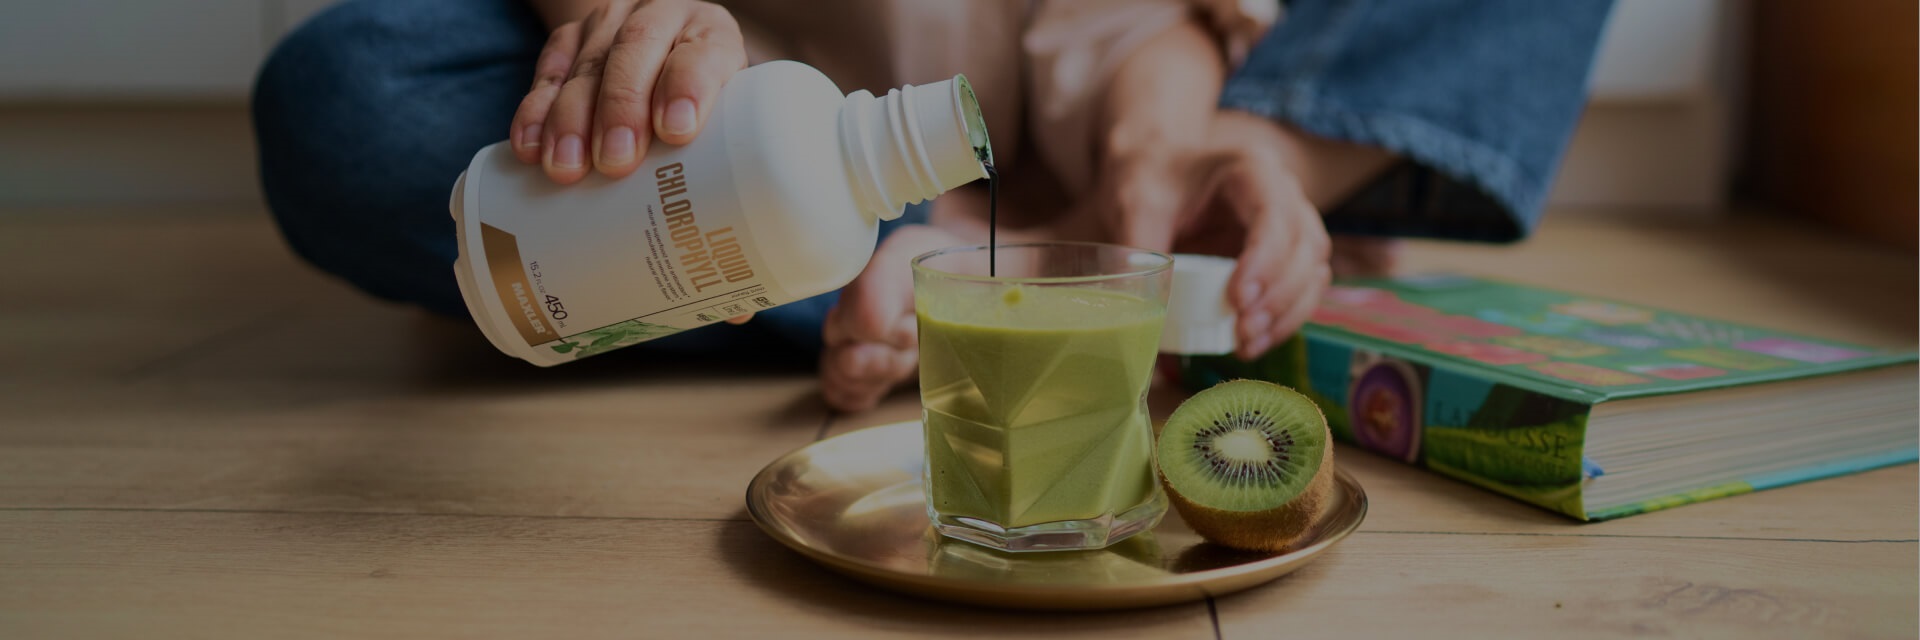 A healthy drink from Liquid Chlorophyll for immune system